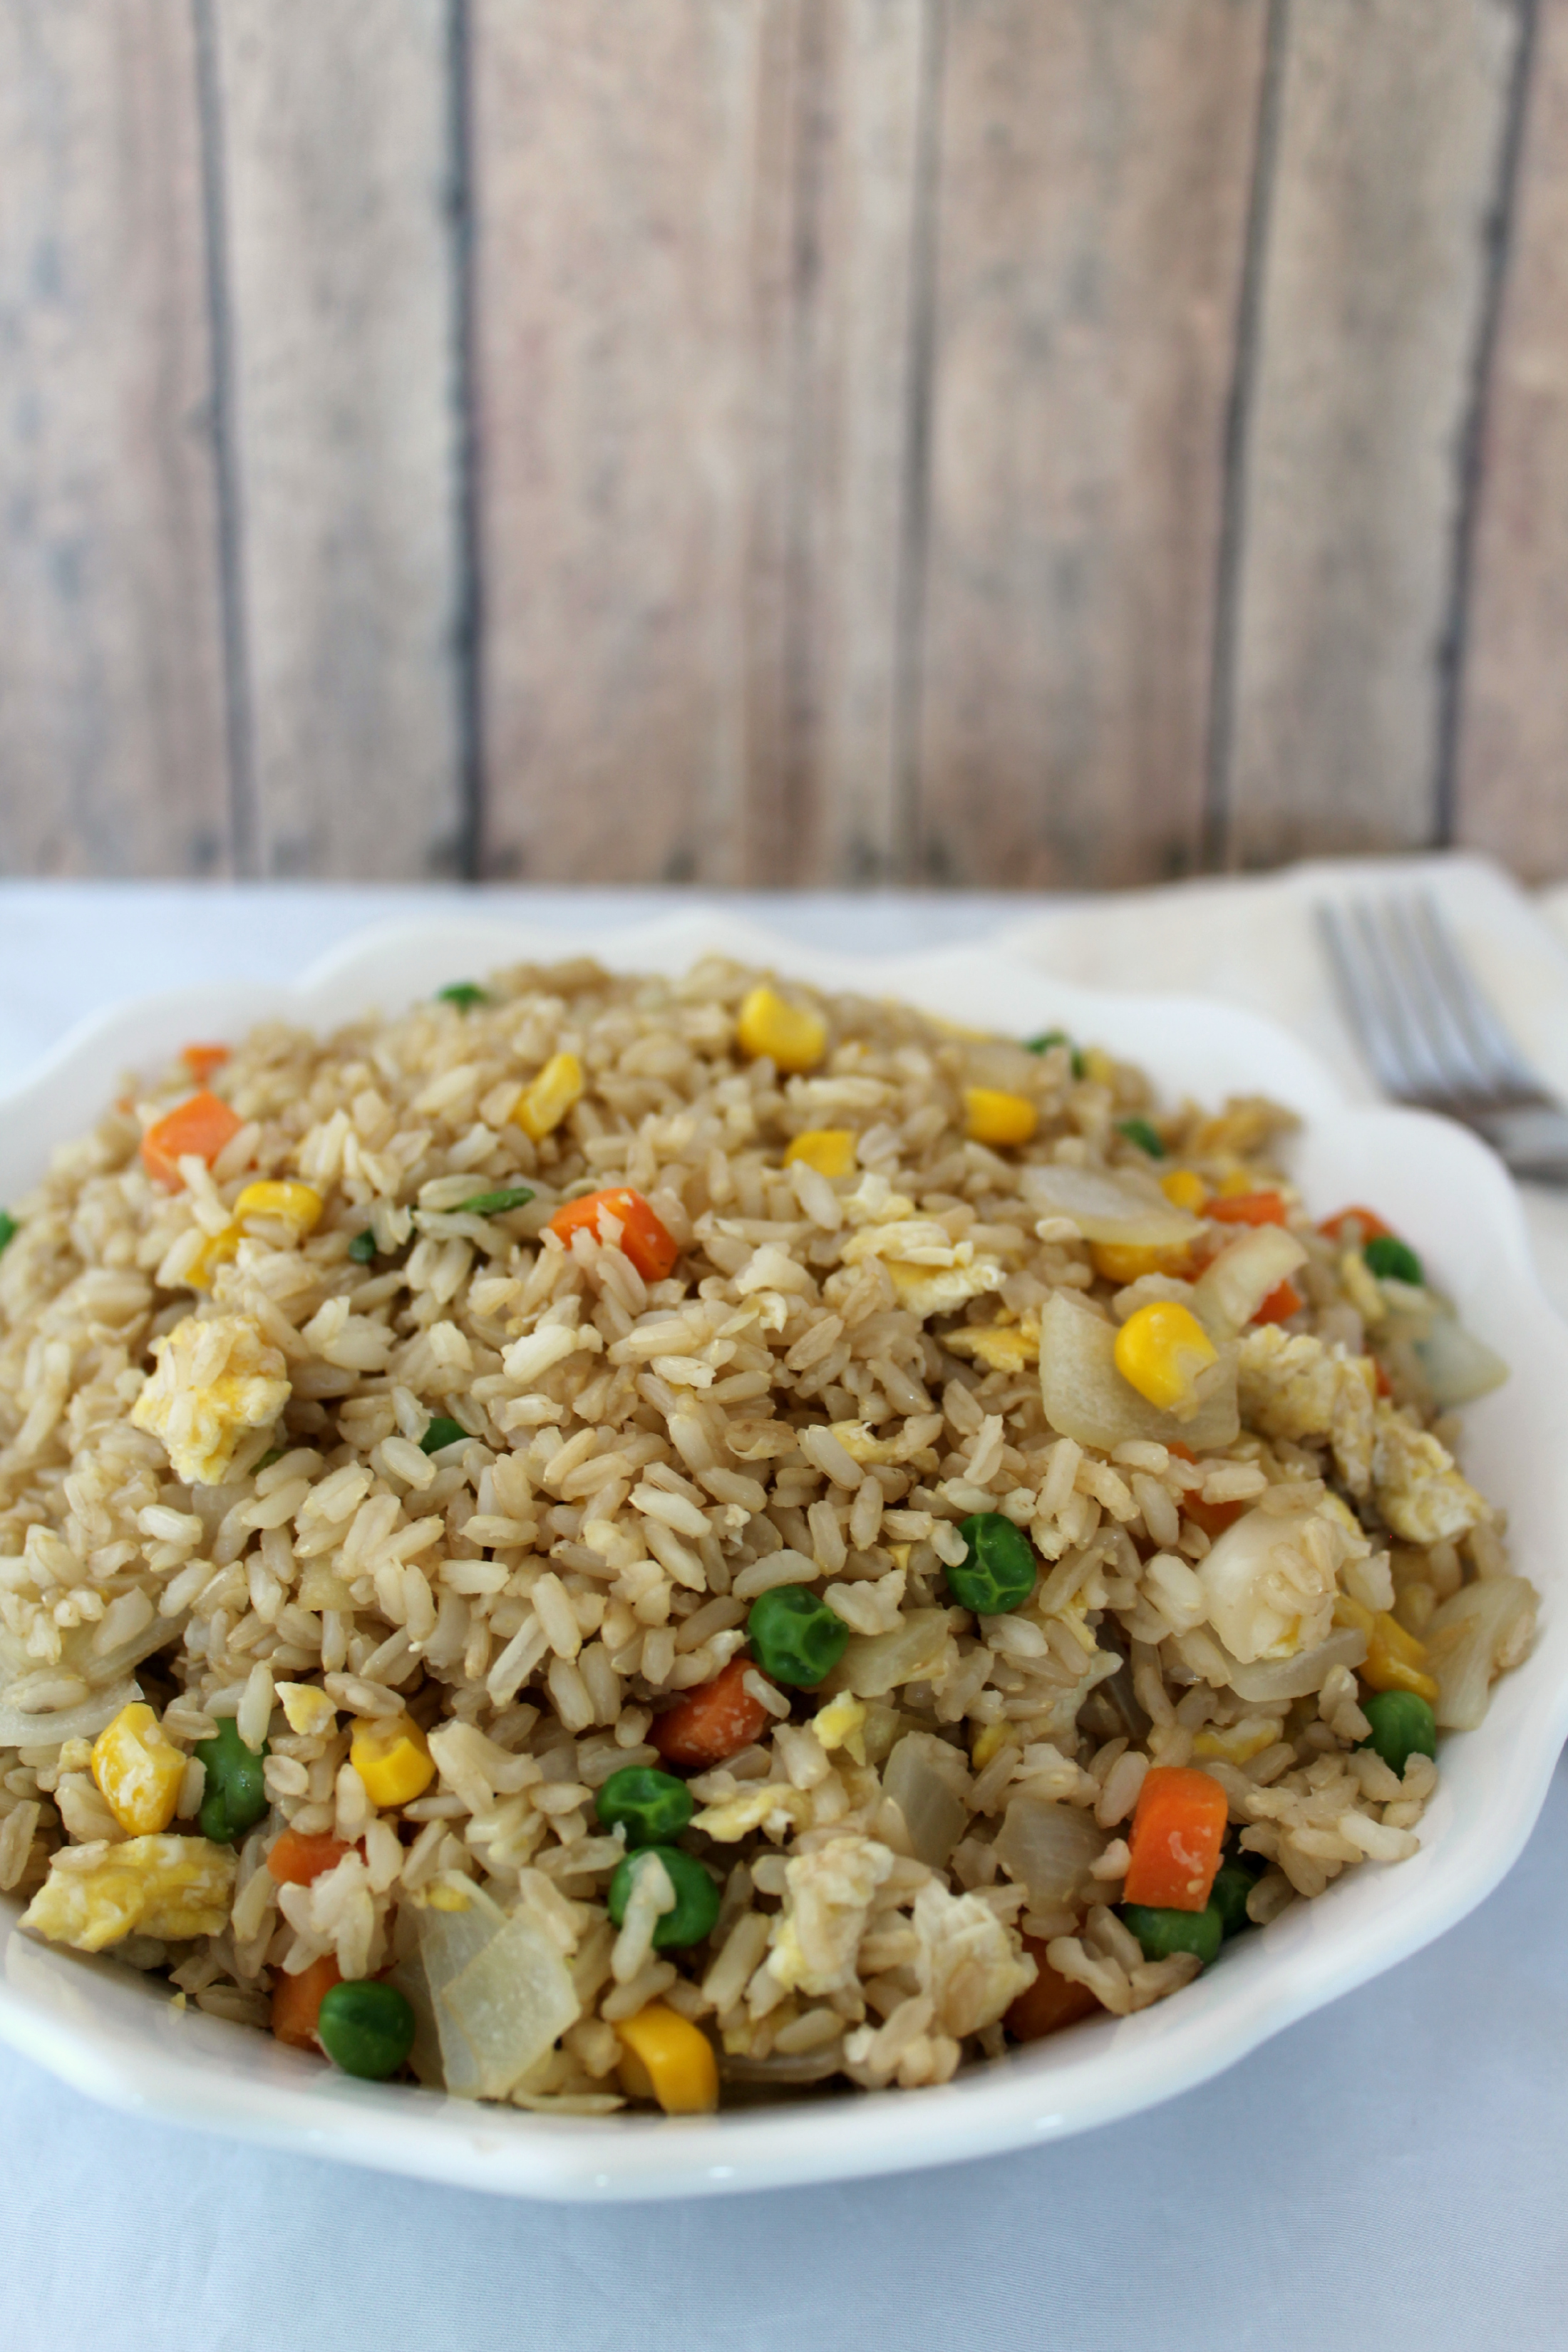 Easy Weeknight Fried Rice Recipe - Just Short of Crazy